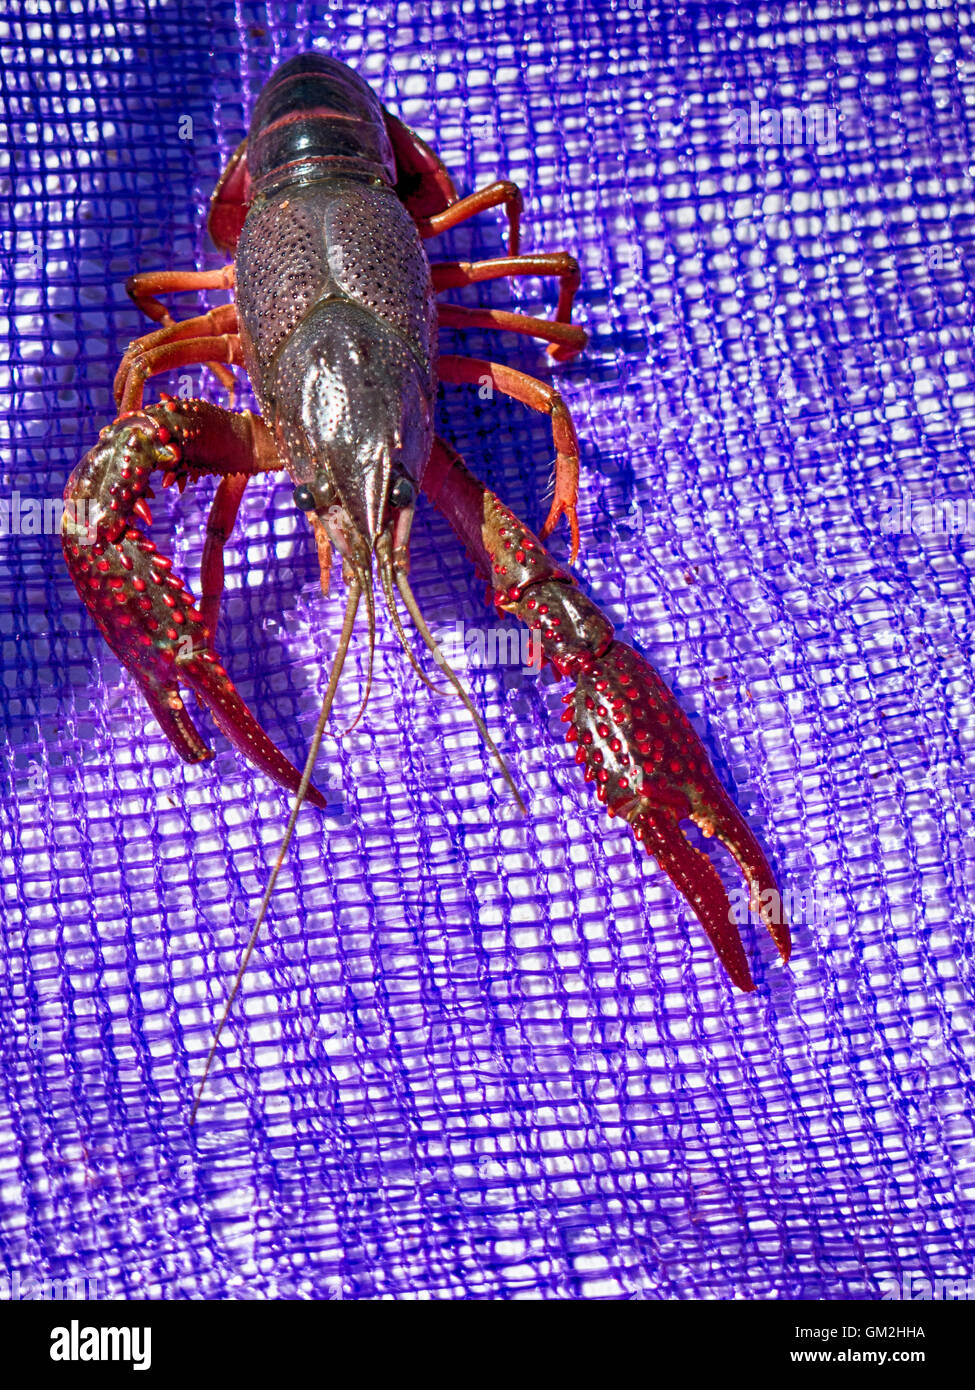 Live Crawfish; also known as crayfish, crawdads, or mudbugs, Stock Photo